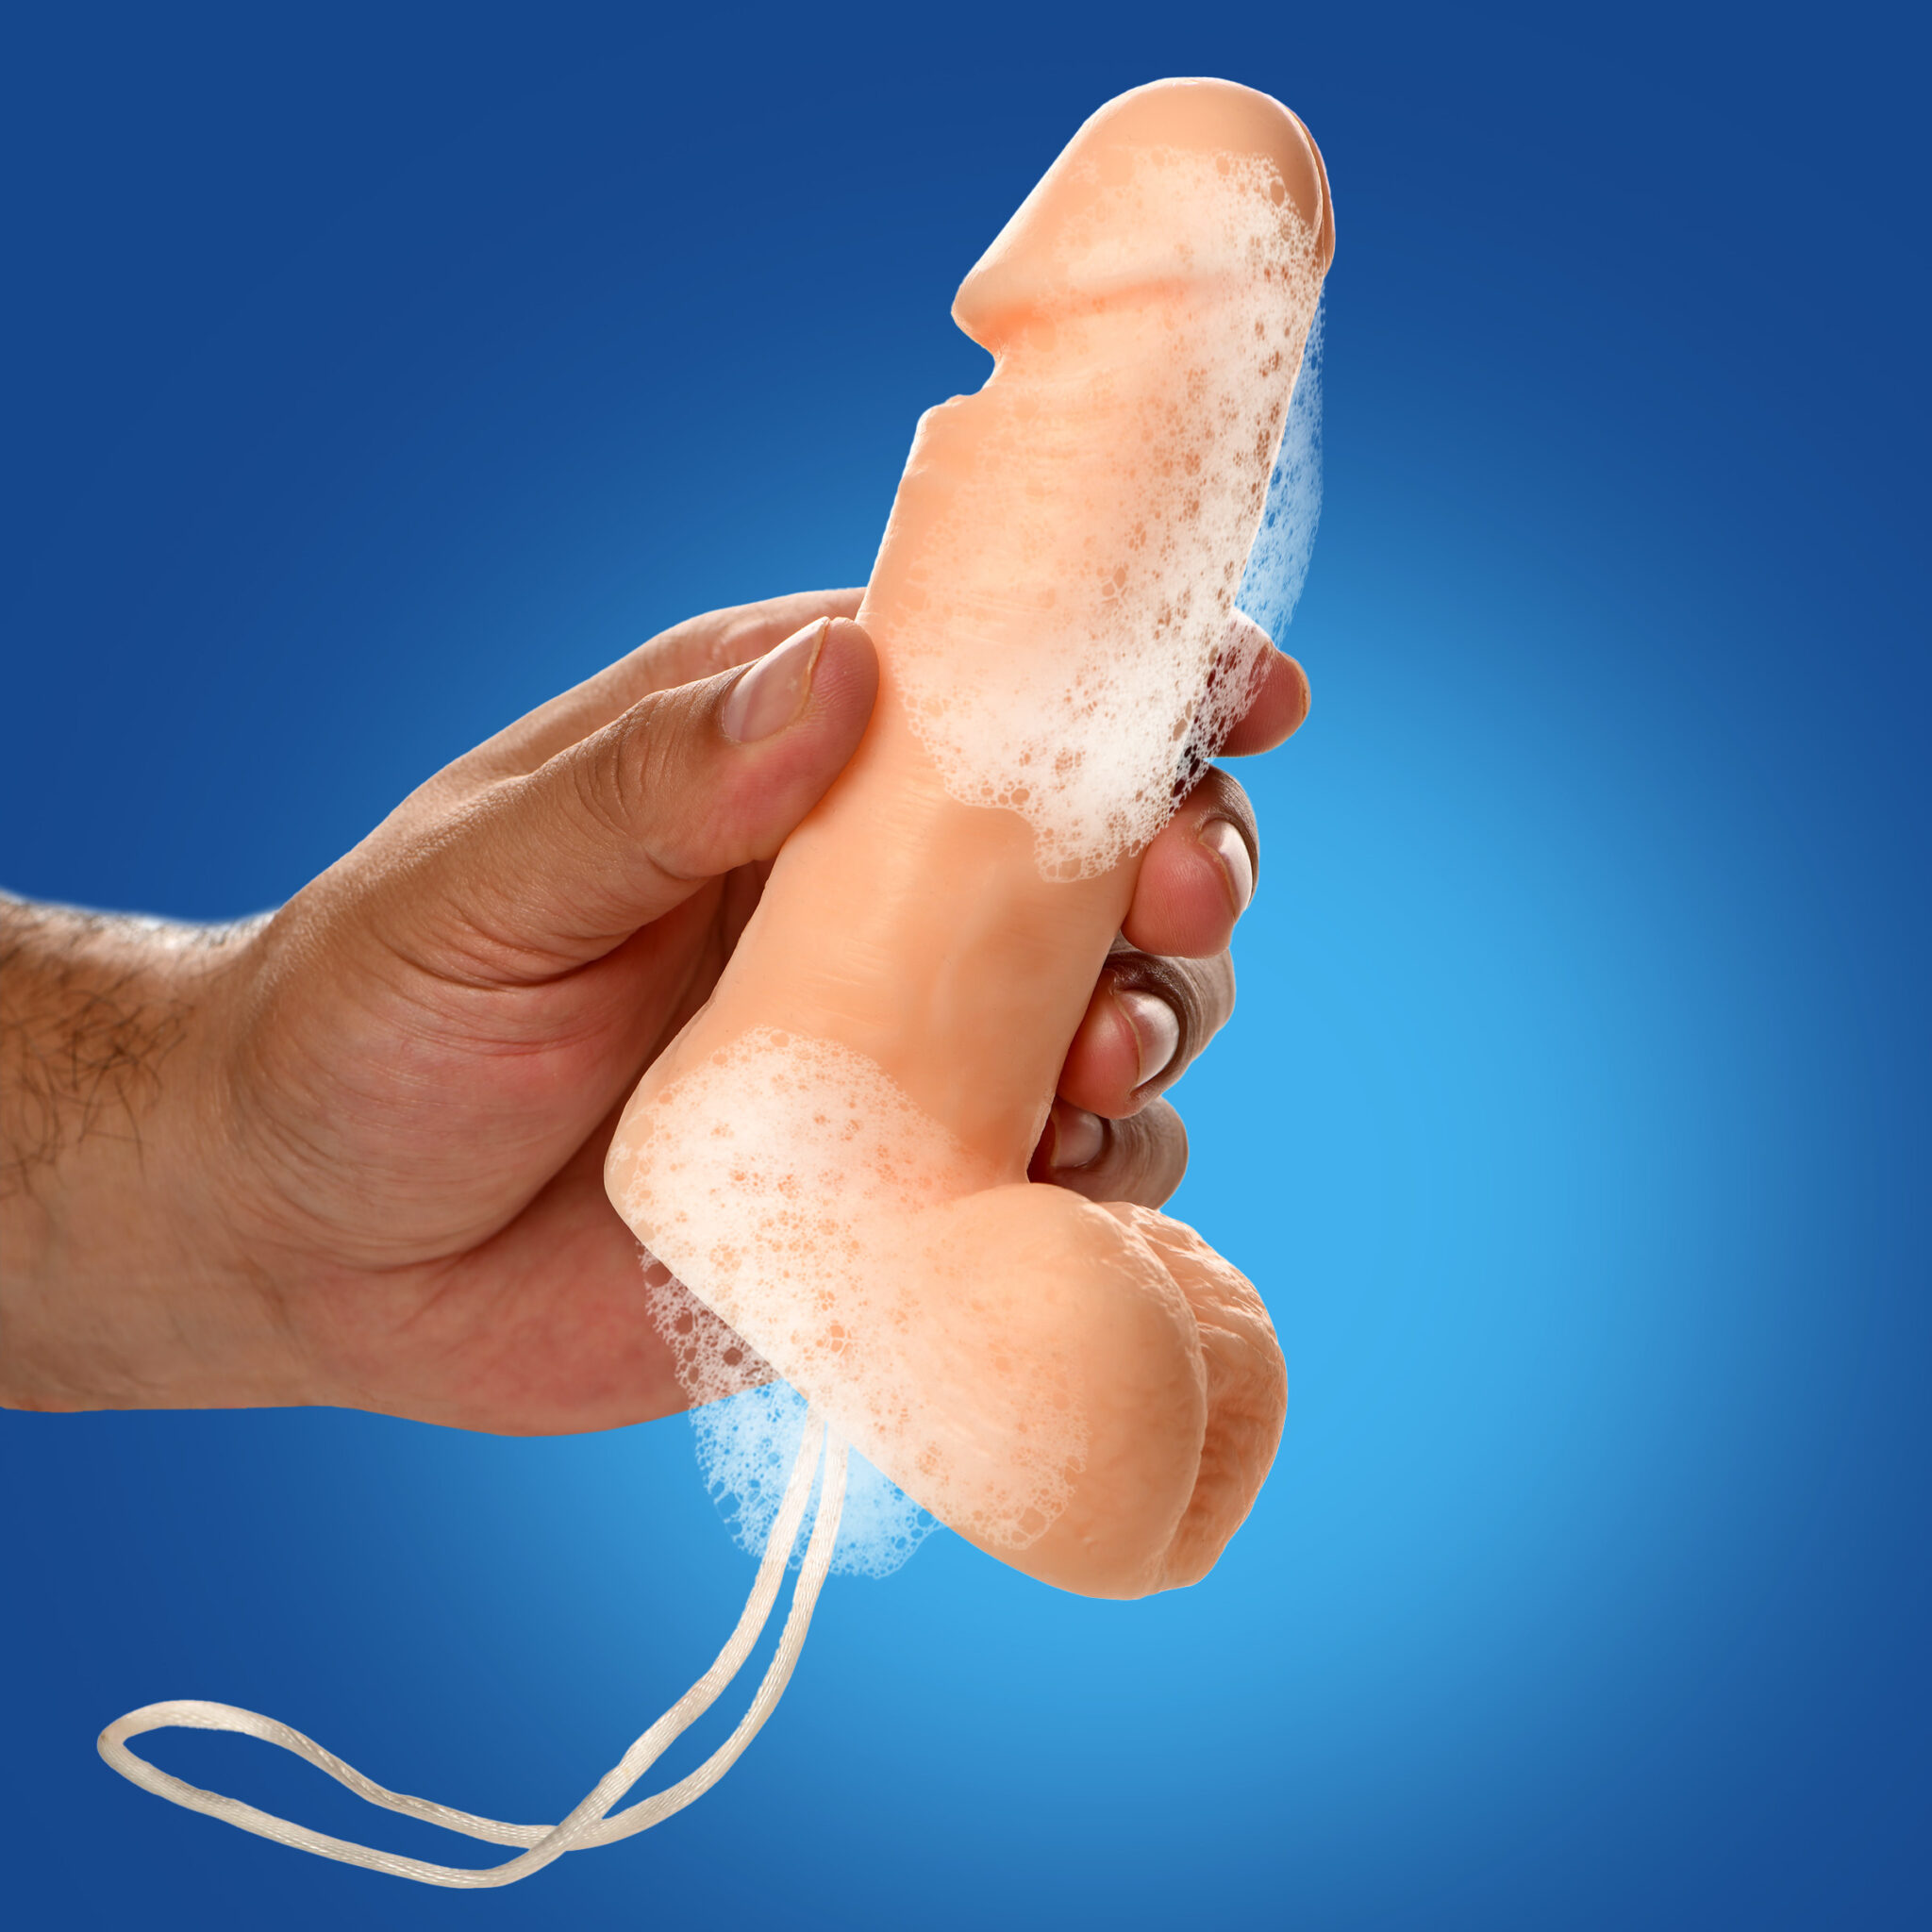 Pecker Cleaner Soap On A Rope-1